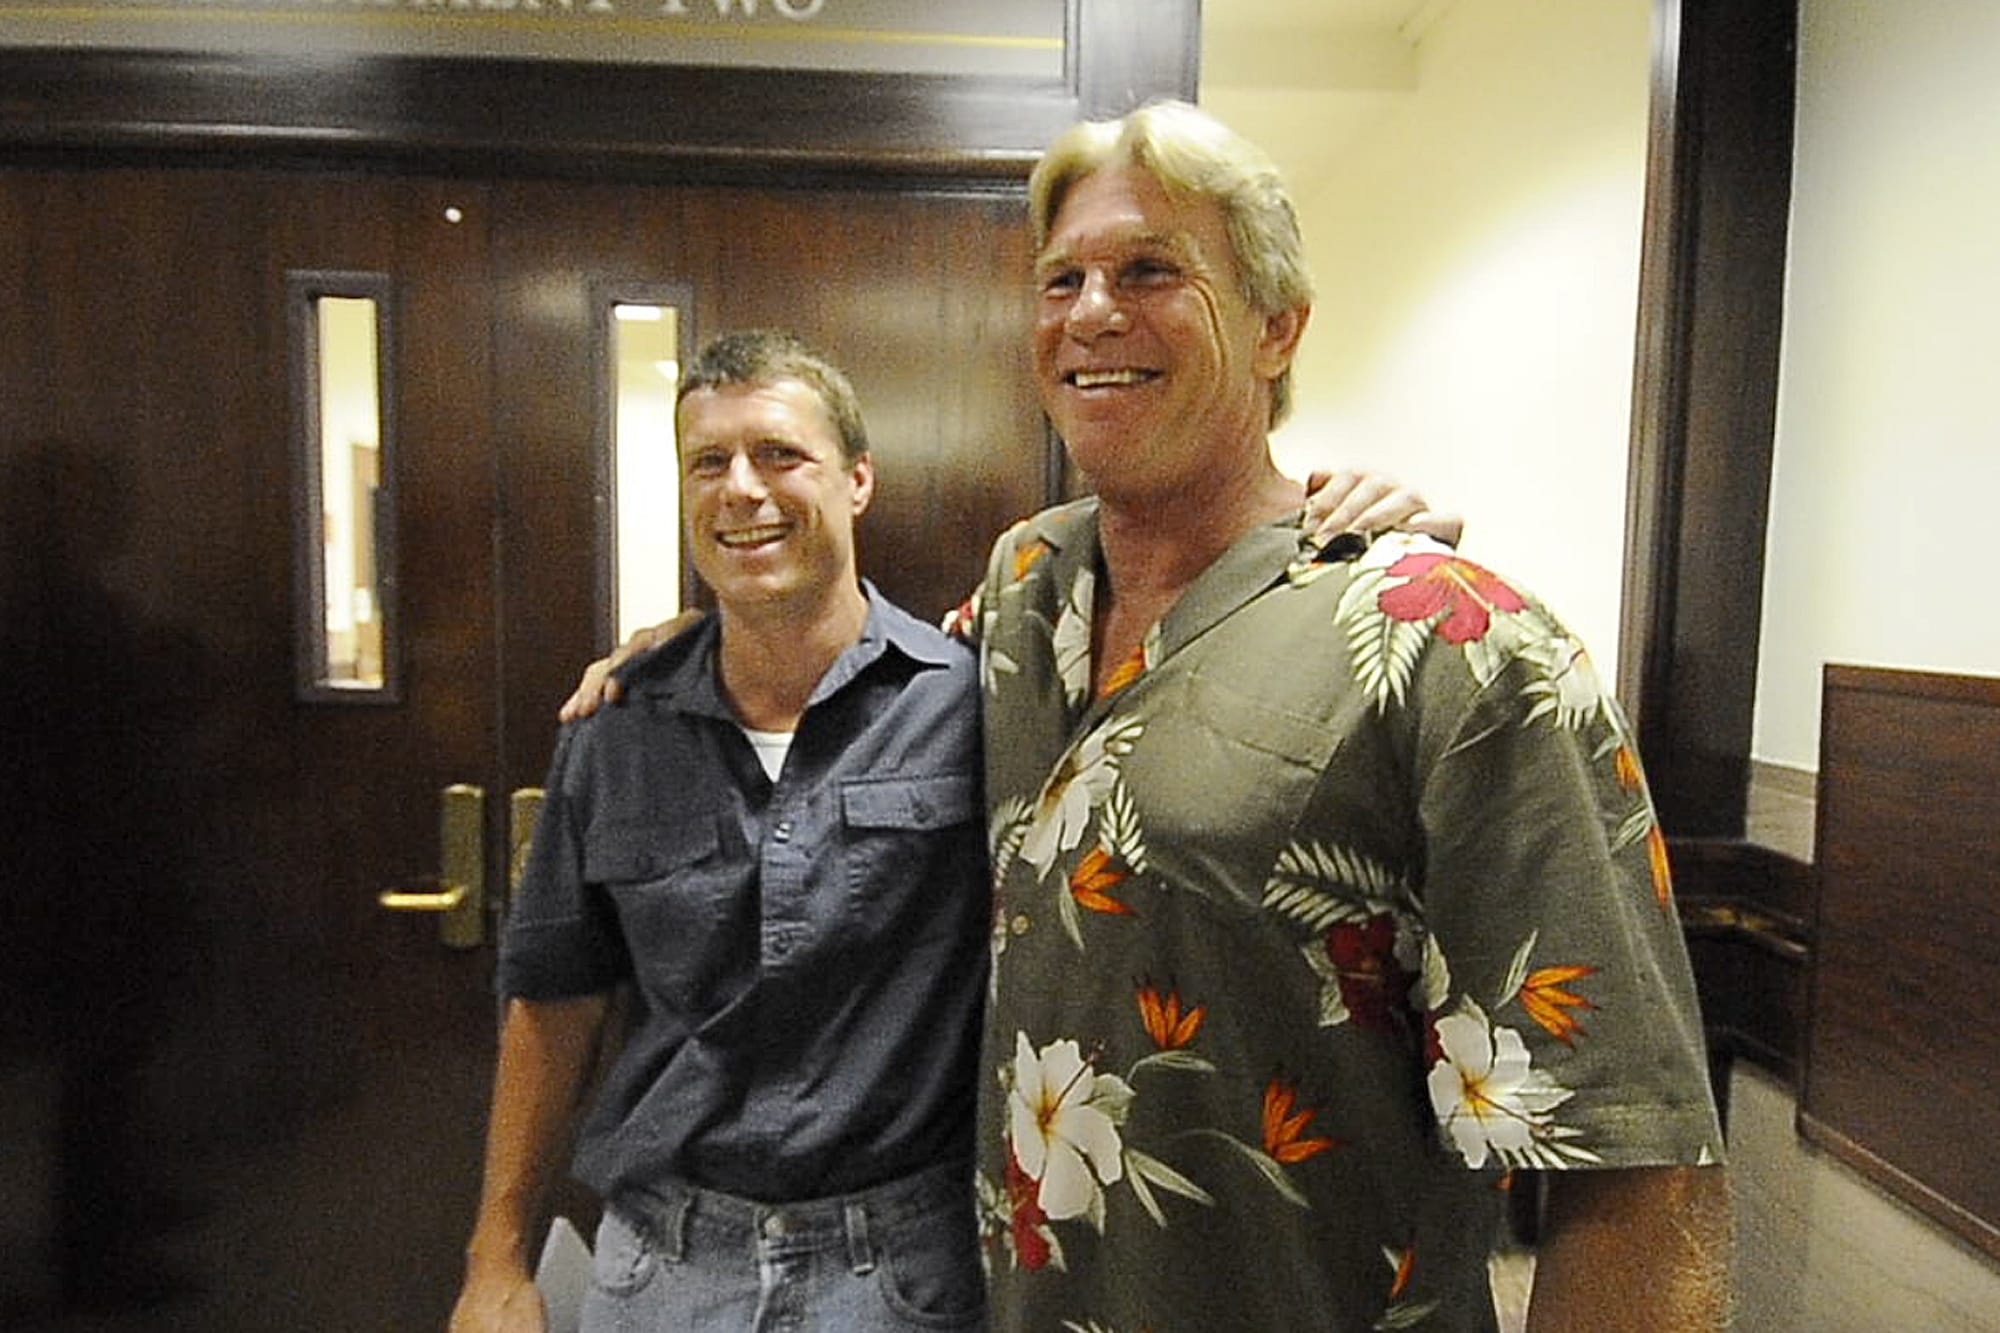 Alan Northrop, left, and Larry Davis celebrate in July 2010 outside a Clark County courtroom after a Superior Court judge dismissed charges against them in a 1993 rape conviction on the basis of new DNA evidence that pointed to different assailants.